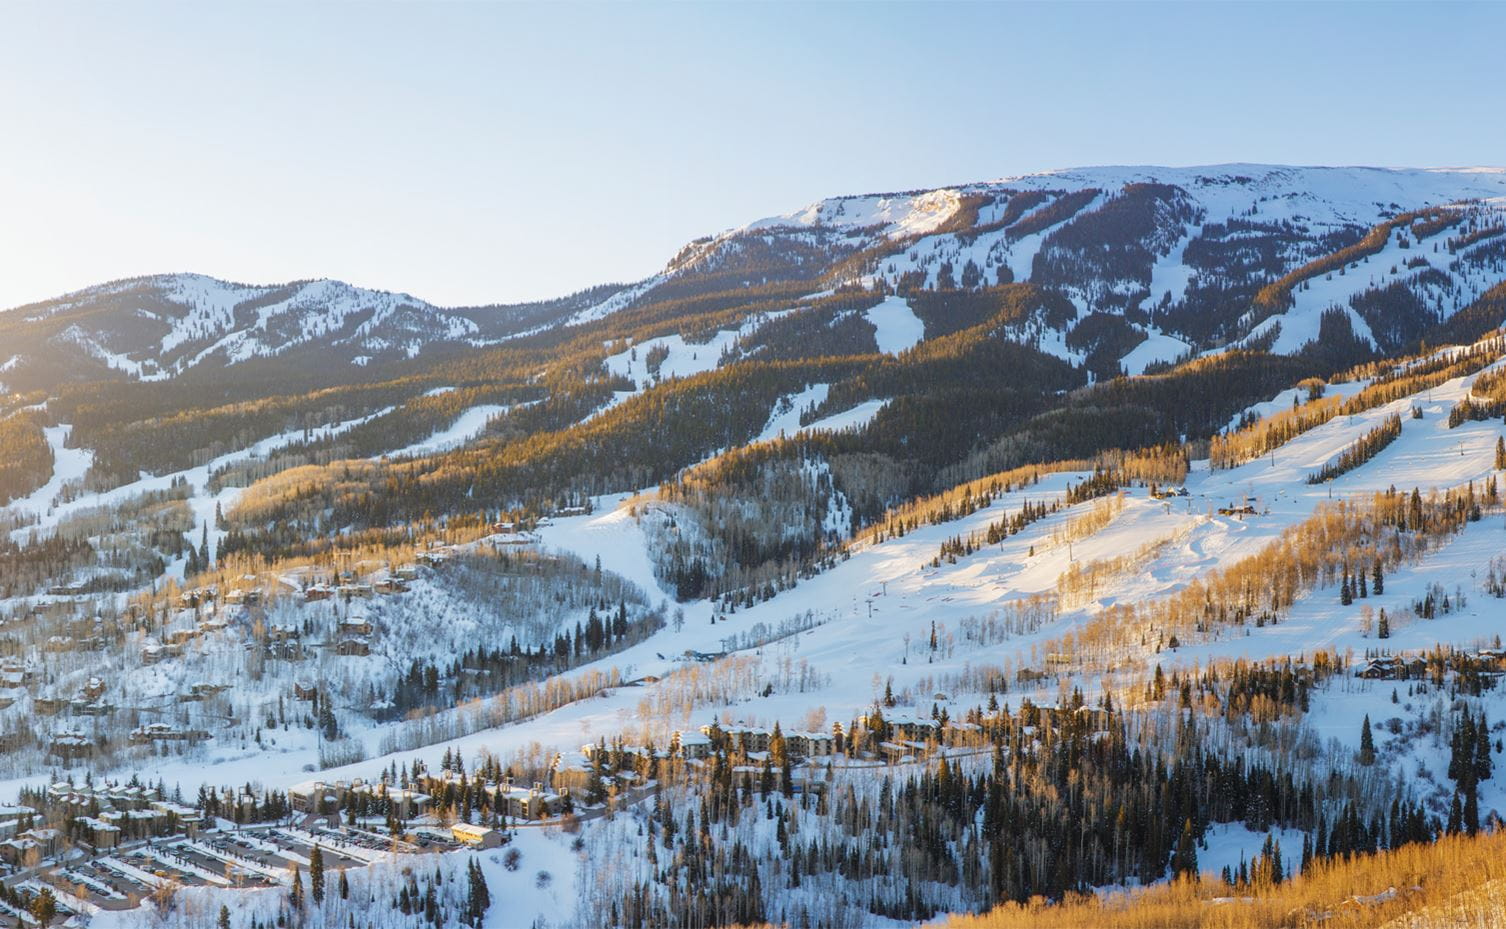 Snowmass at sunrise in early winter